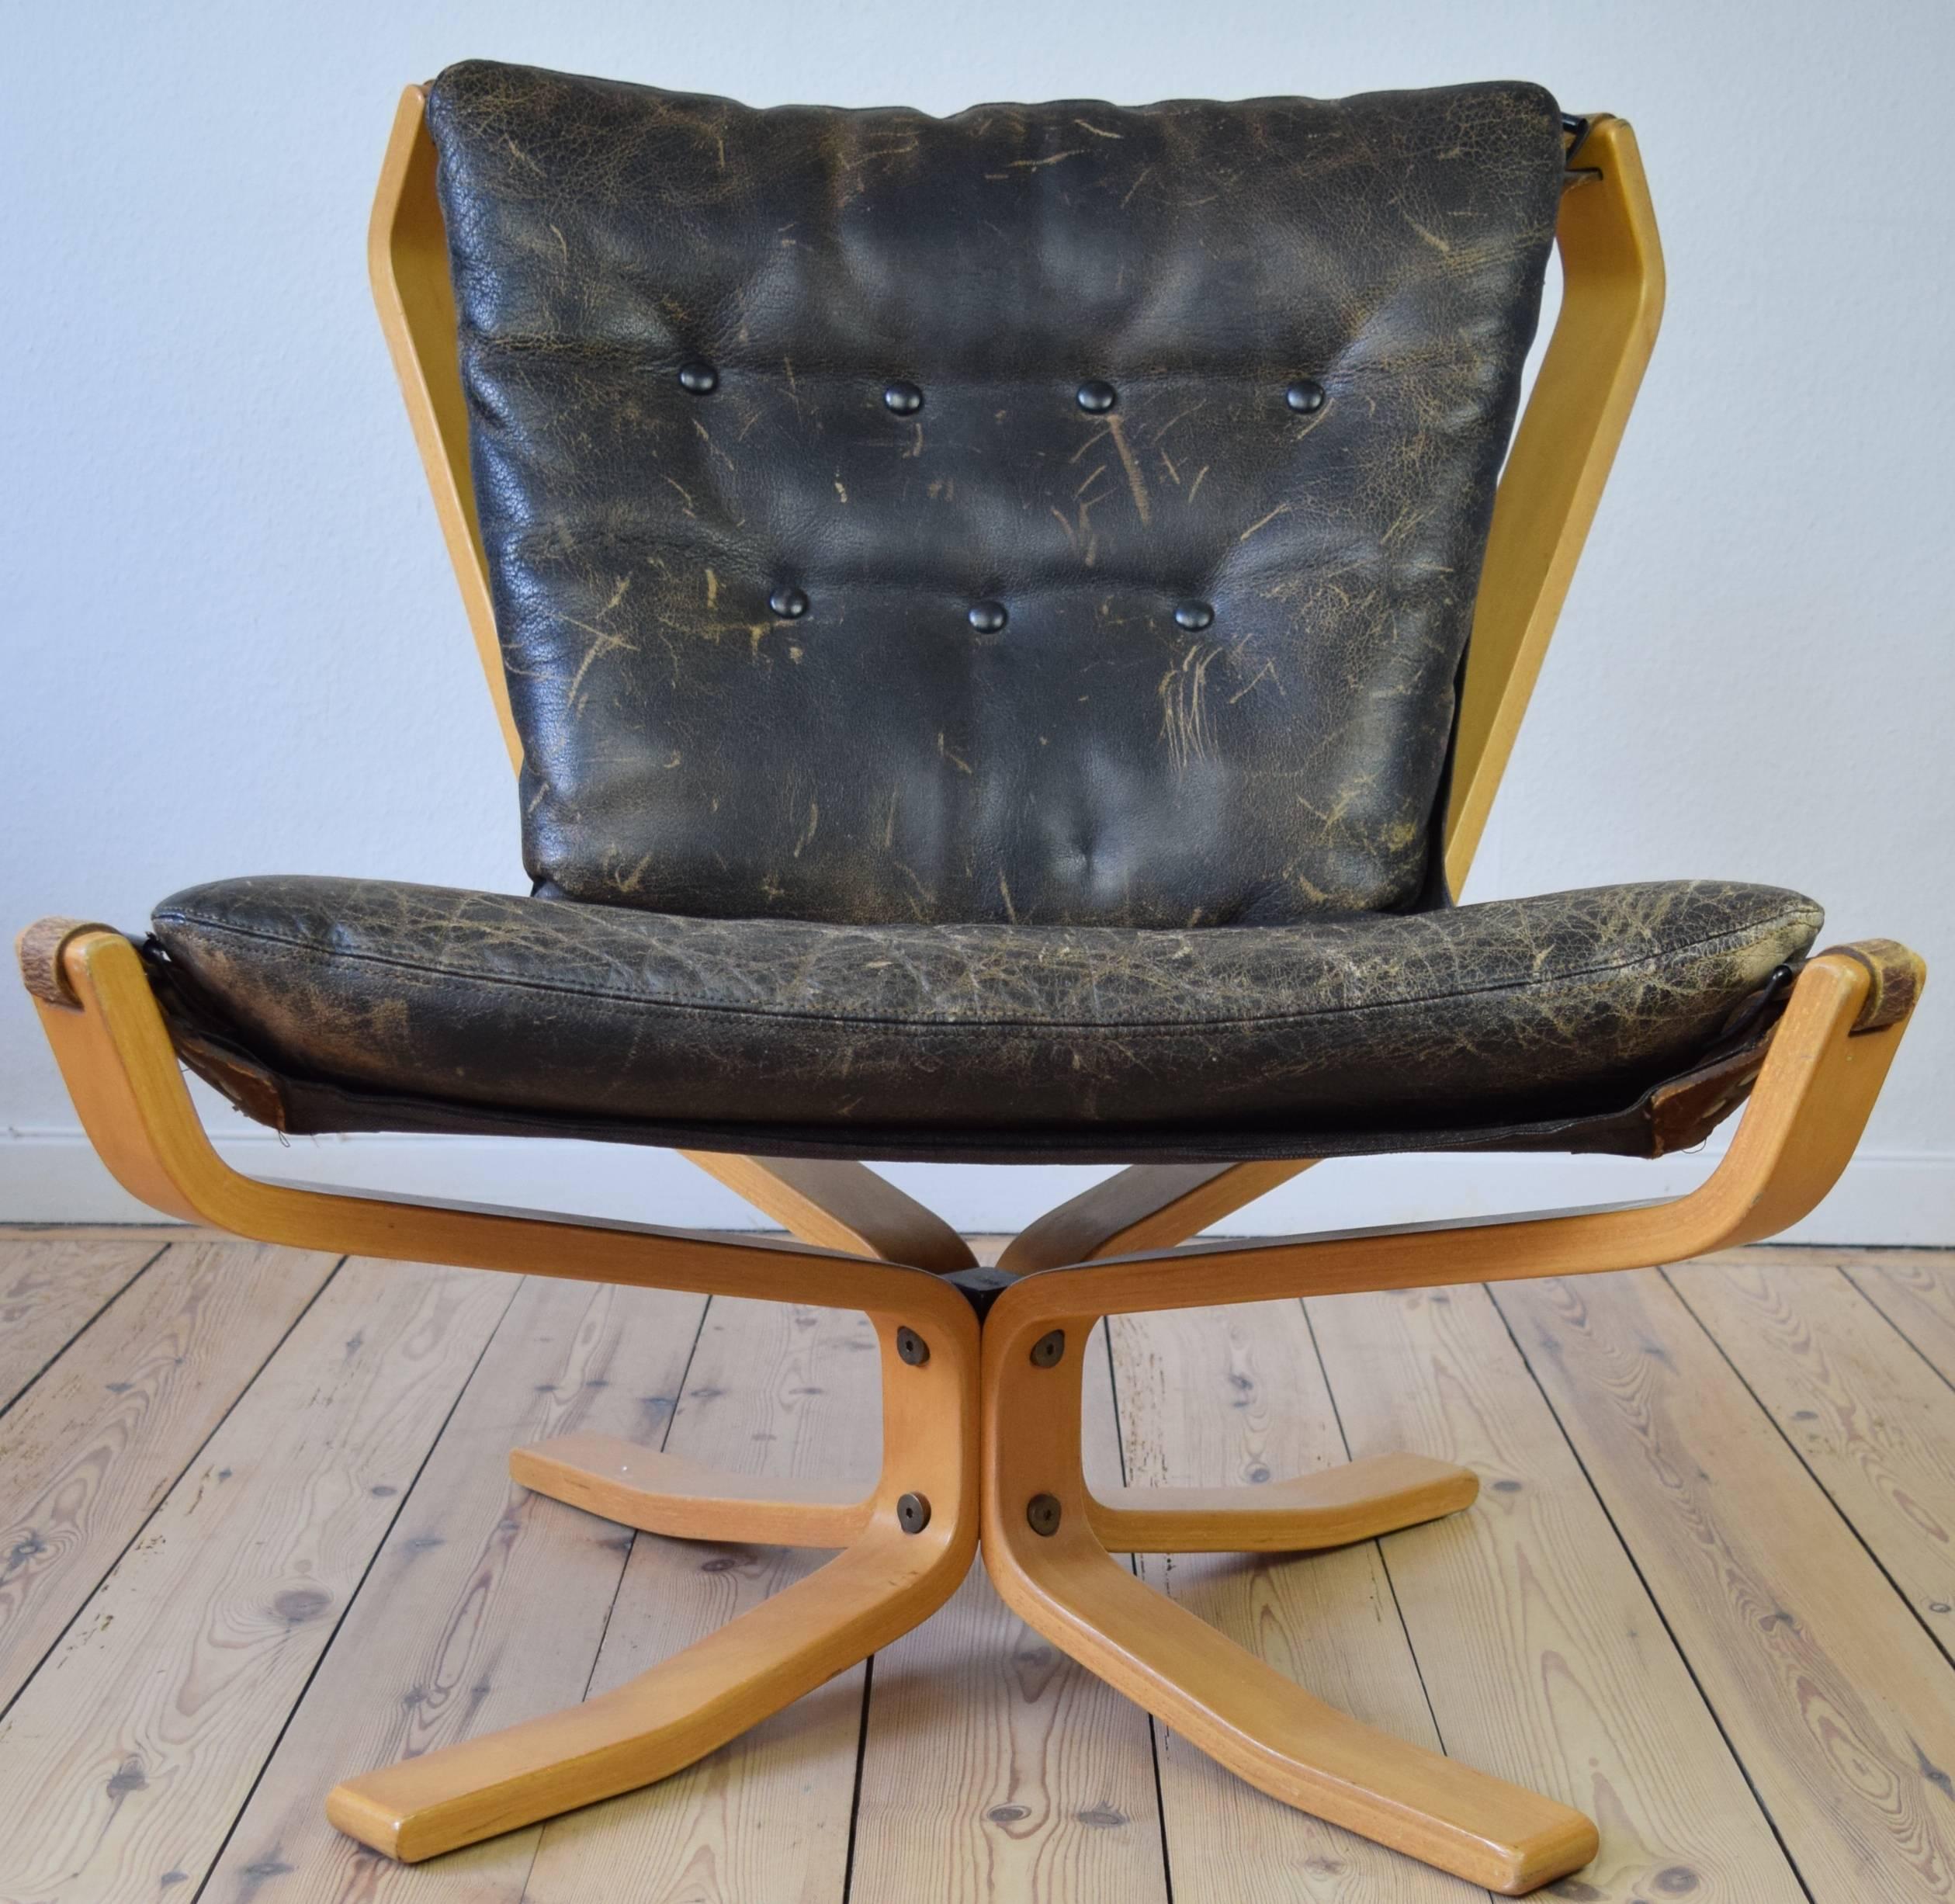 Low back Falcon chair designed by Sigurd Resell and manufactured in Denmark in the 1970s. The chair features a bent beechwood frame, with a buffalo leather cushion. Buffalo hides are thick and durable as they are not stretched during the tanning